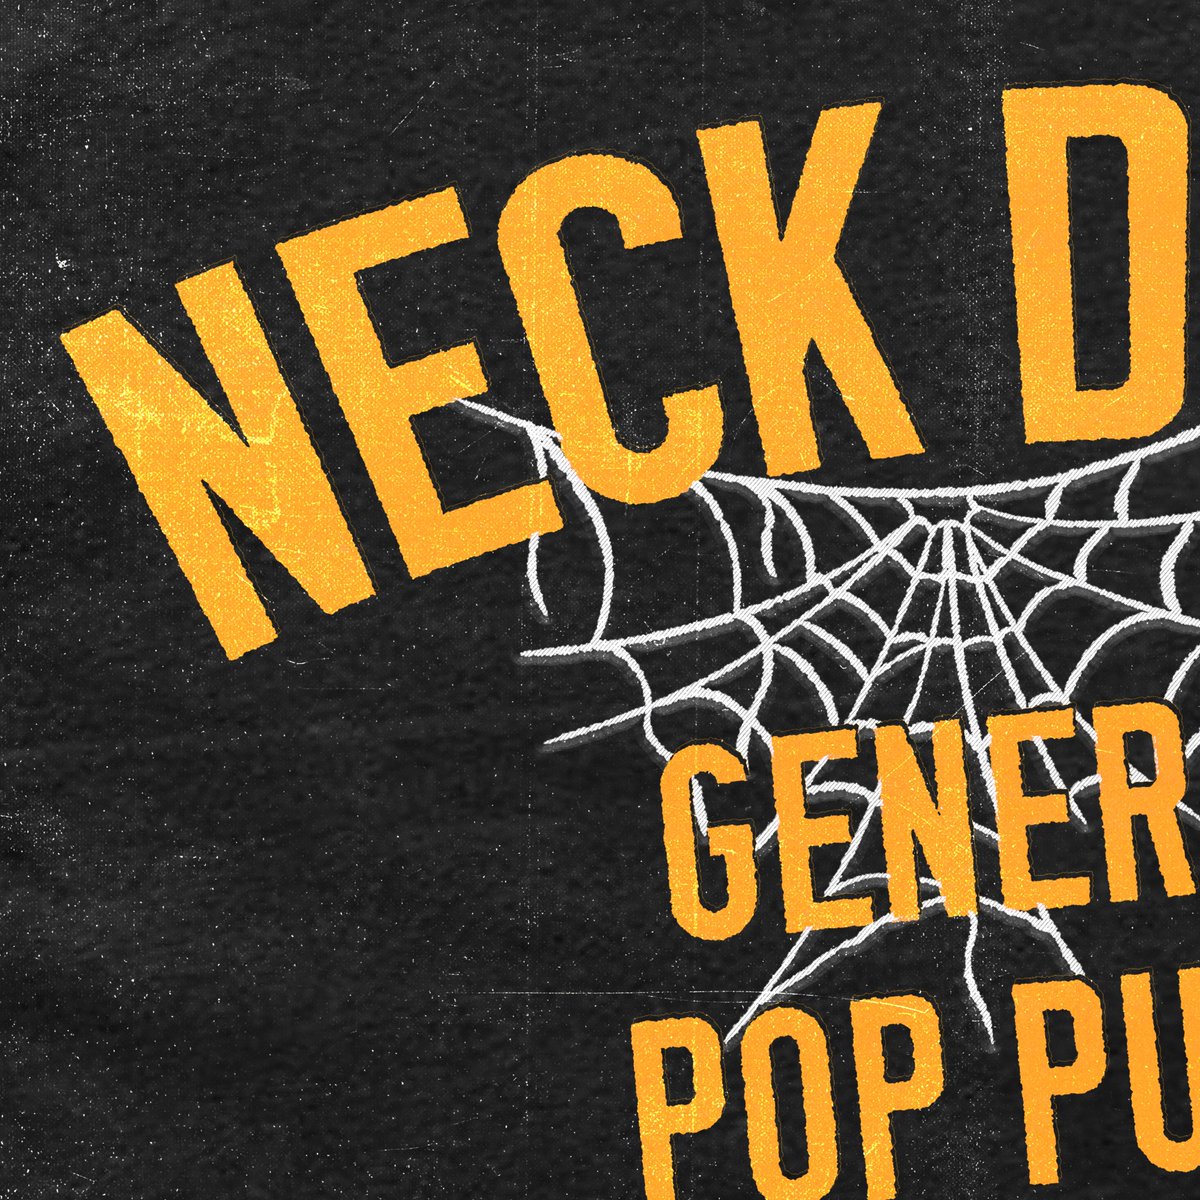 Something wicked this way comes…Neck Deep Halloween merch drop 2022 goes live Tuesday 7pm UK / 11am LA / 2pm New York